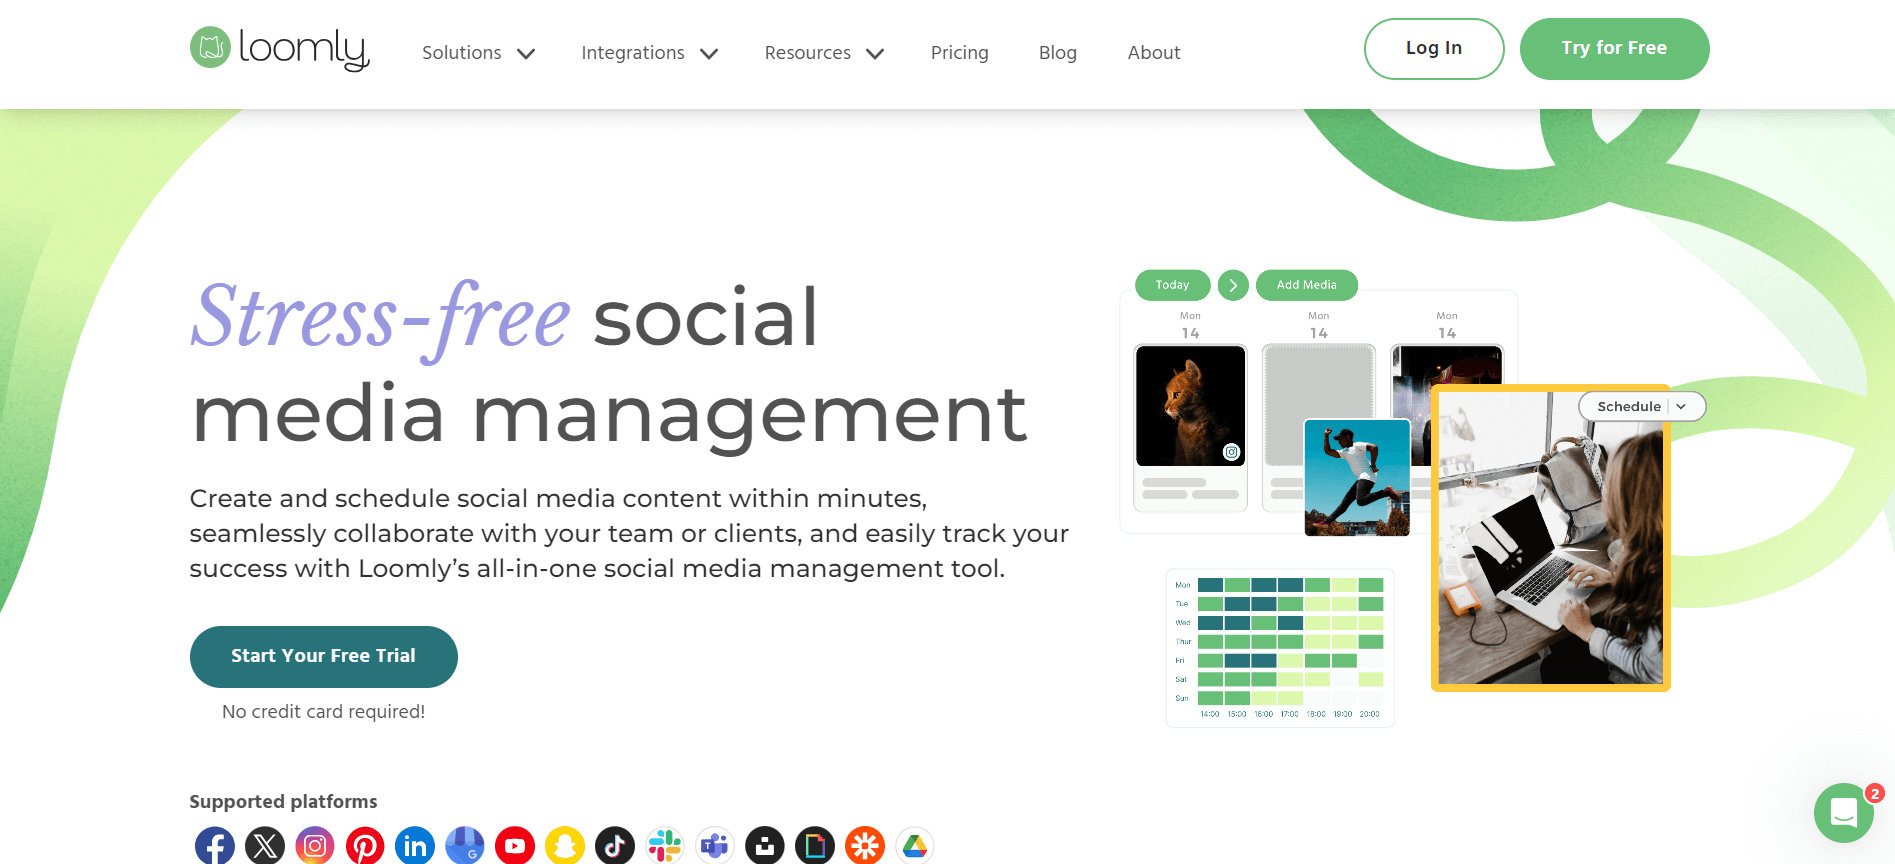 Homepage of Loomly, featuring a stress-free social media management promise, displaying interface samples for content scheduling and collaboration, with a "Start Your Free Trial" button.